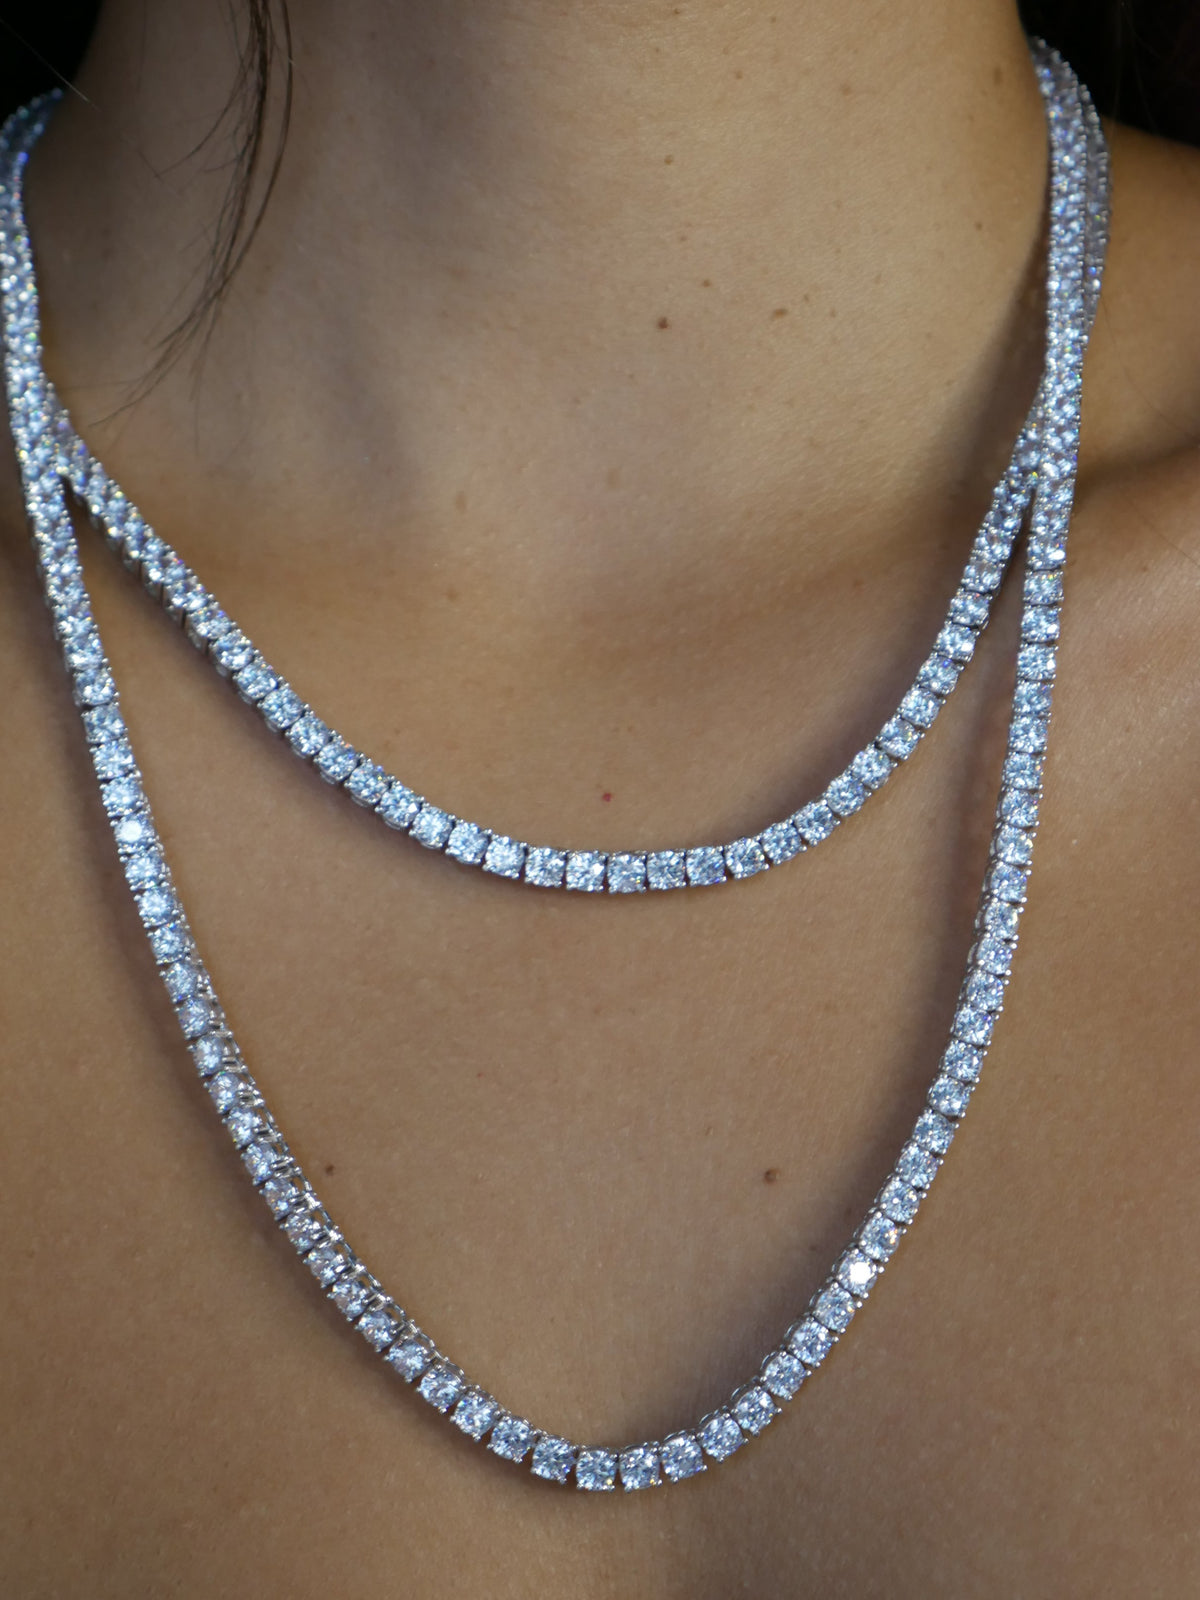 diamond necklaces, silver diamond necklace, 925, white gold,  necklaces with rhinestones, cubic zirconia jewelry, tennis necklaces, short diamond necklaces for men and women, trending on tiktok, nice jewelry, fine jewelry, cool jewelry, fashion jewelry, nickel free, waterproof, sexy jewelry